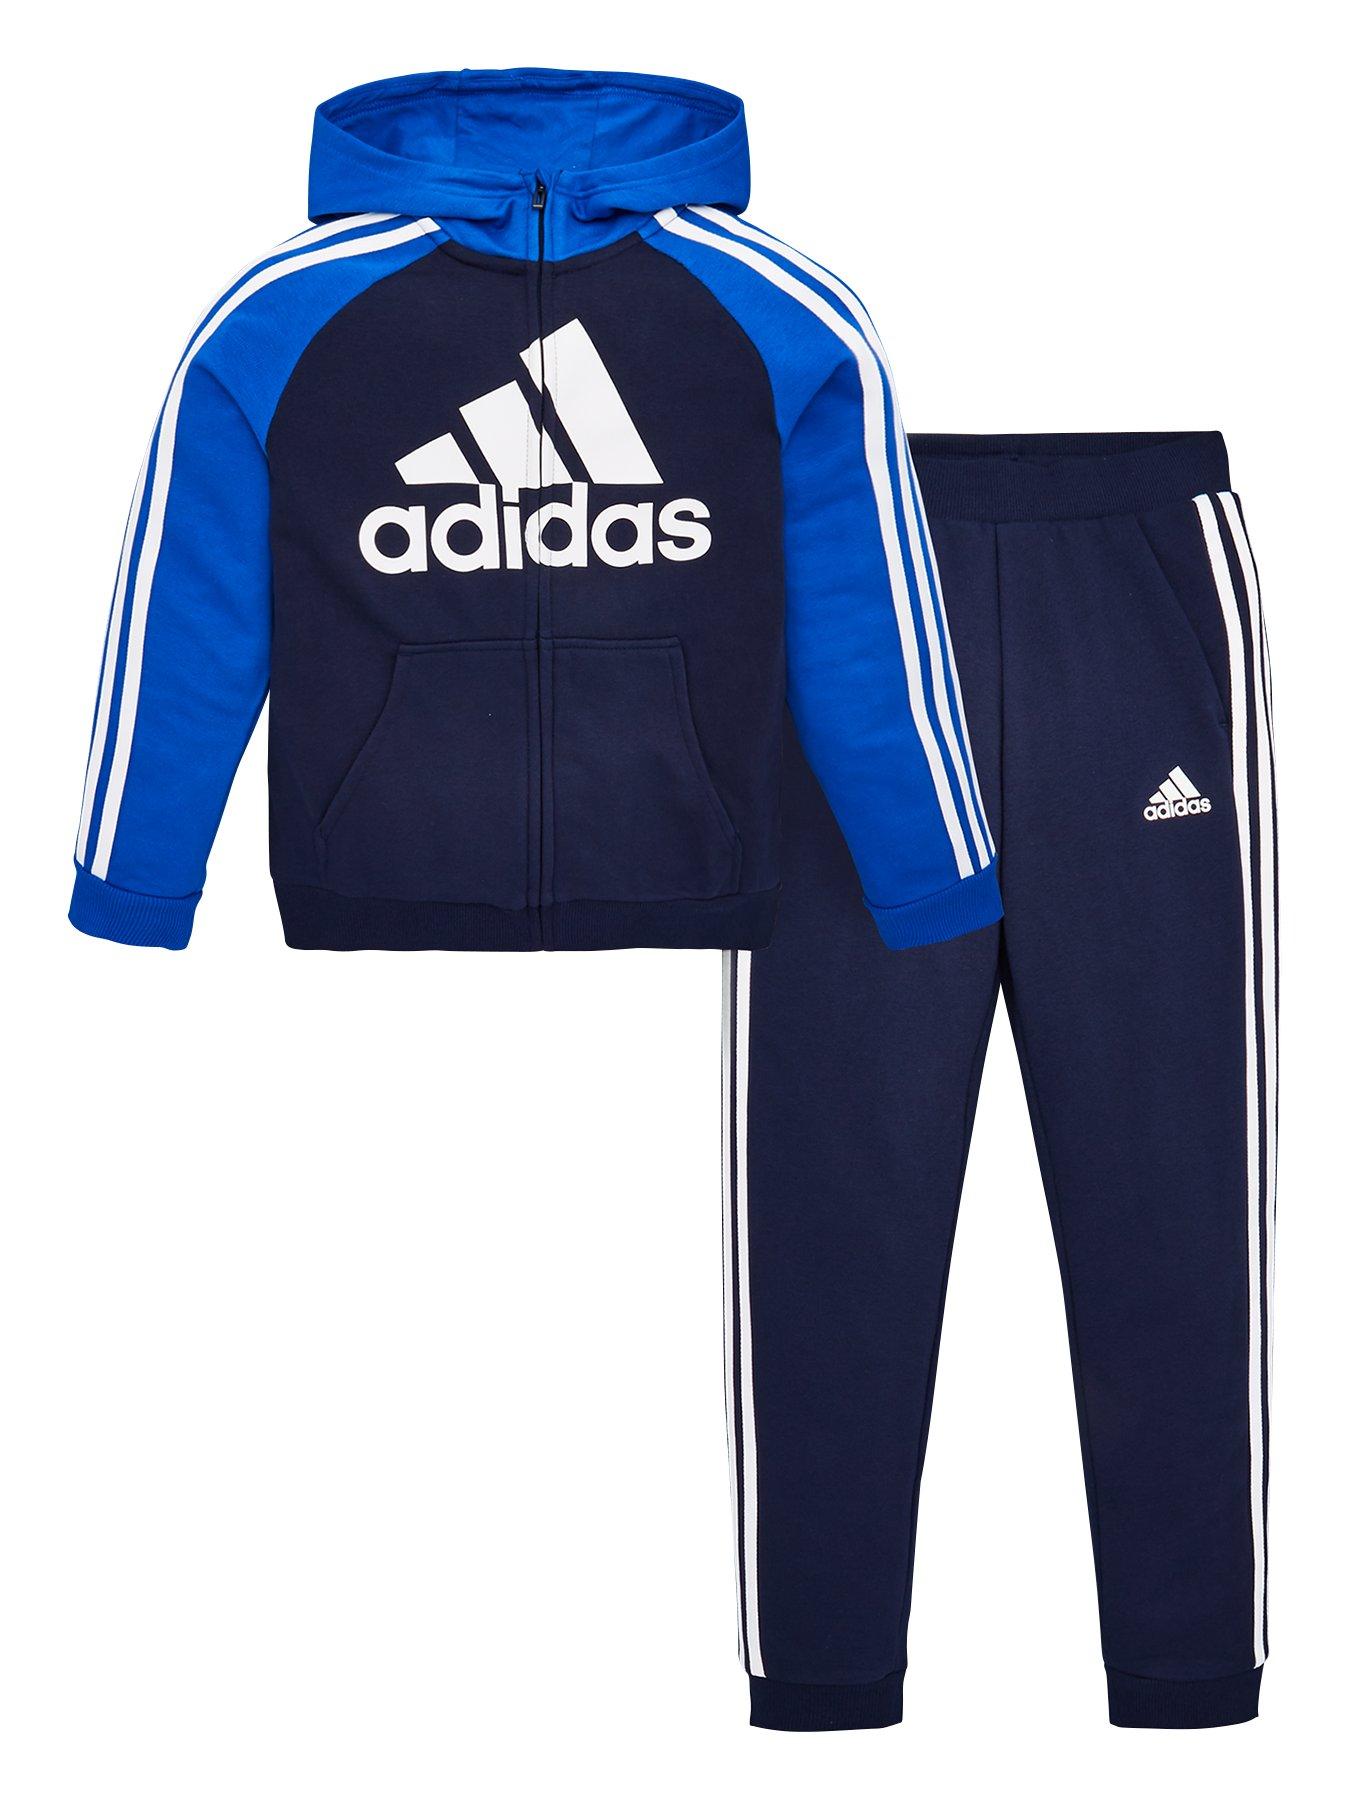 adidas tracksuit for kids